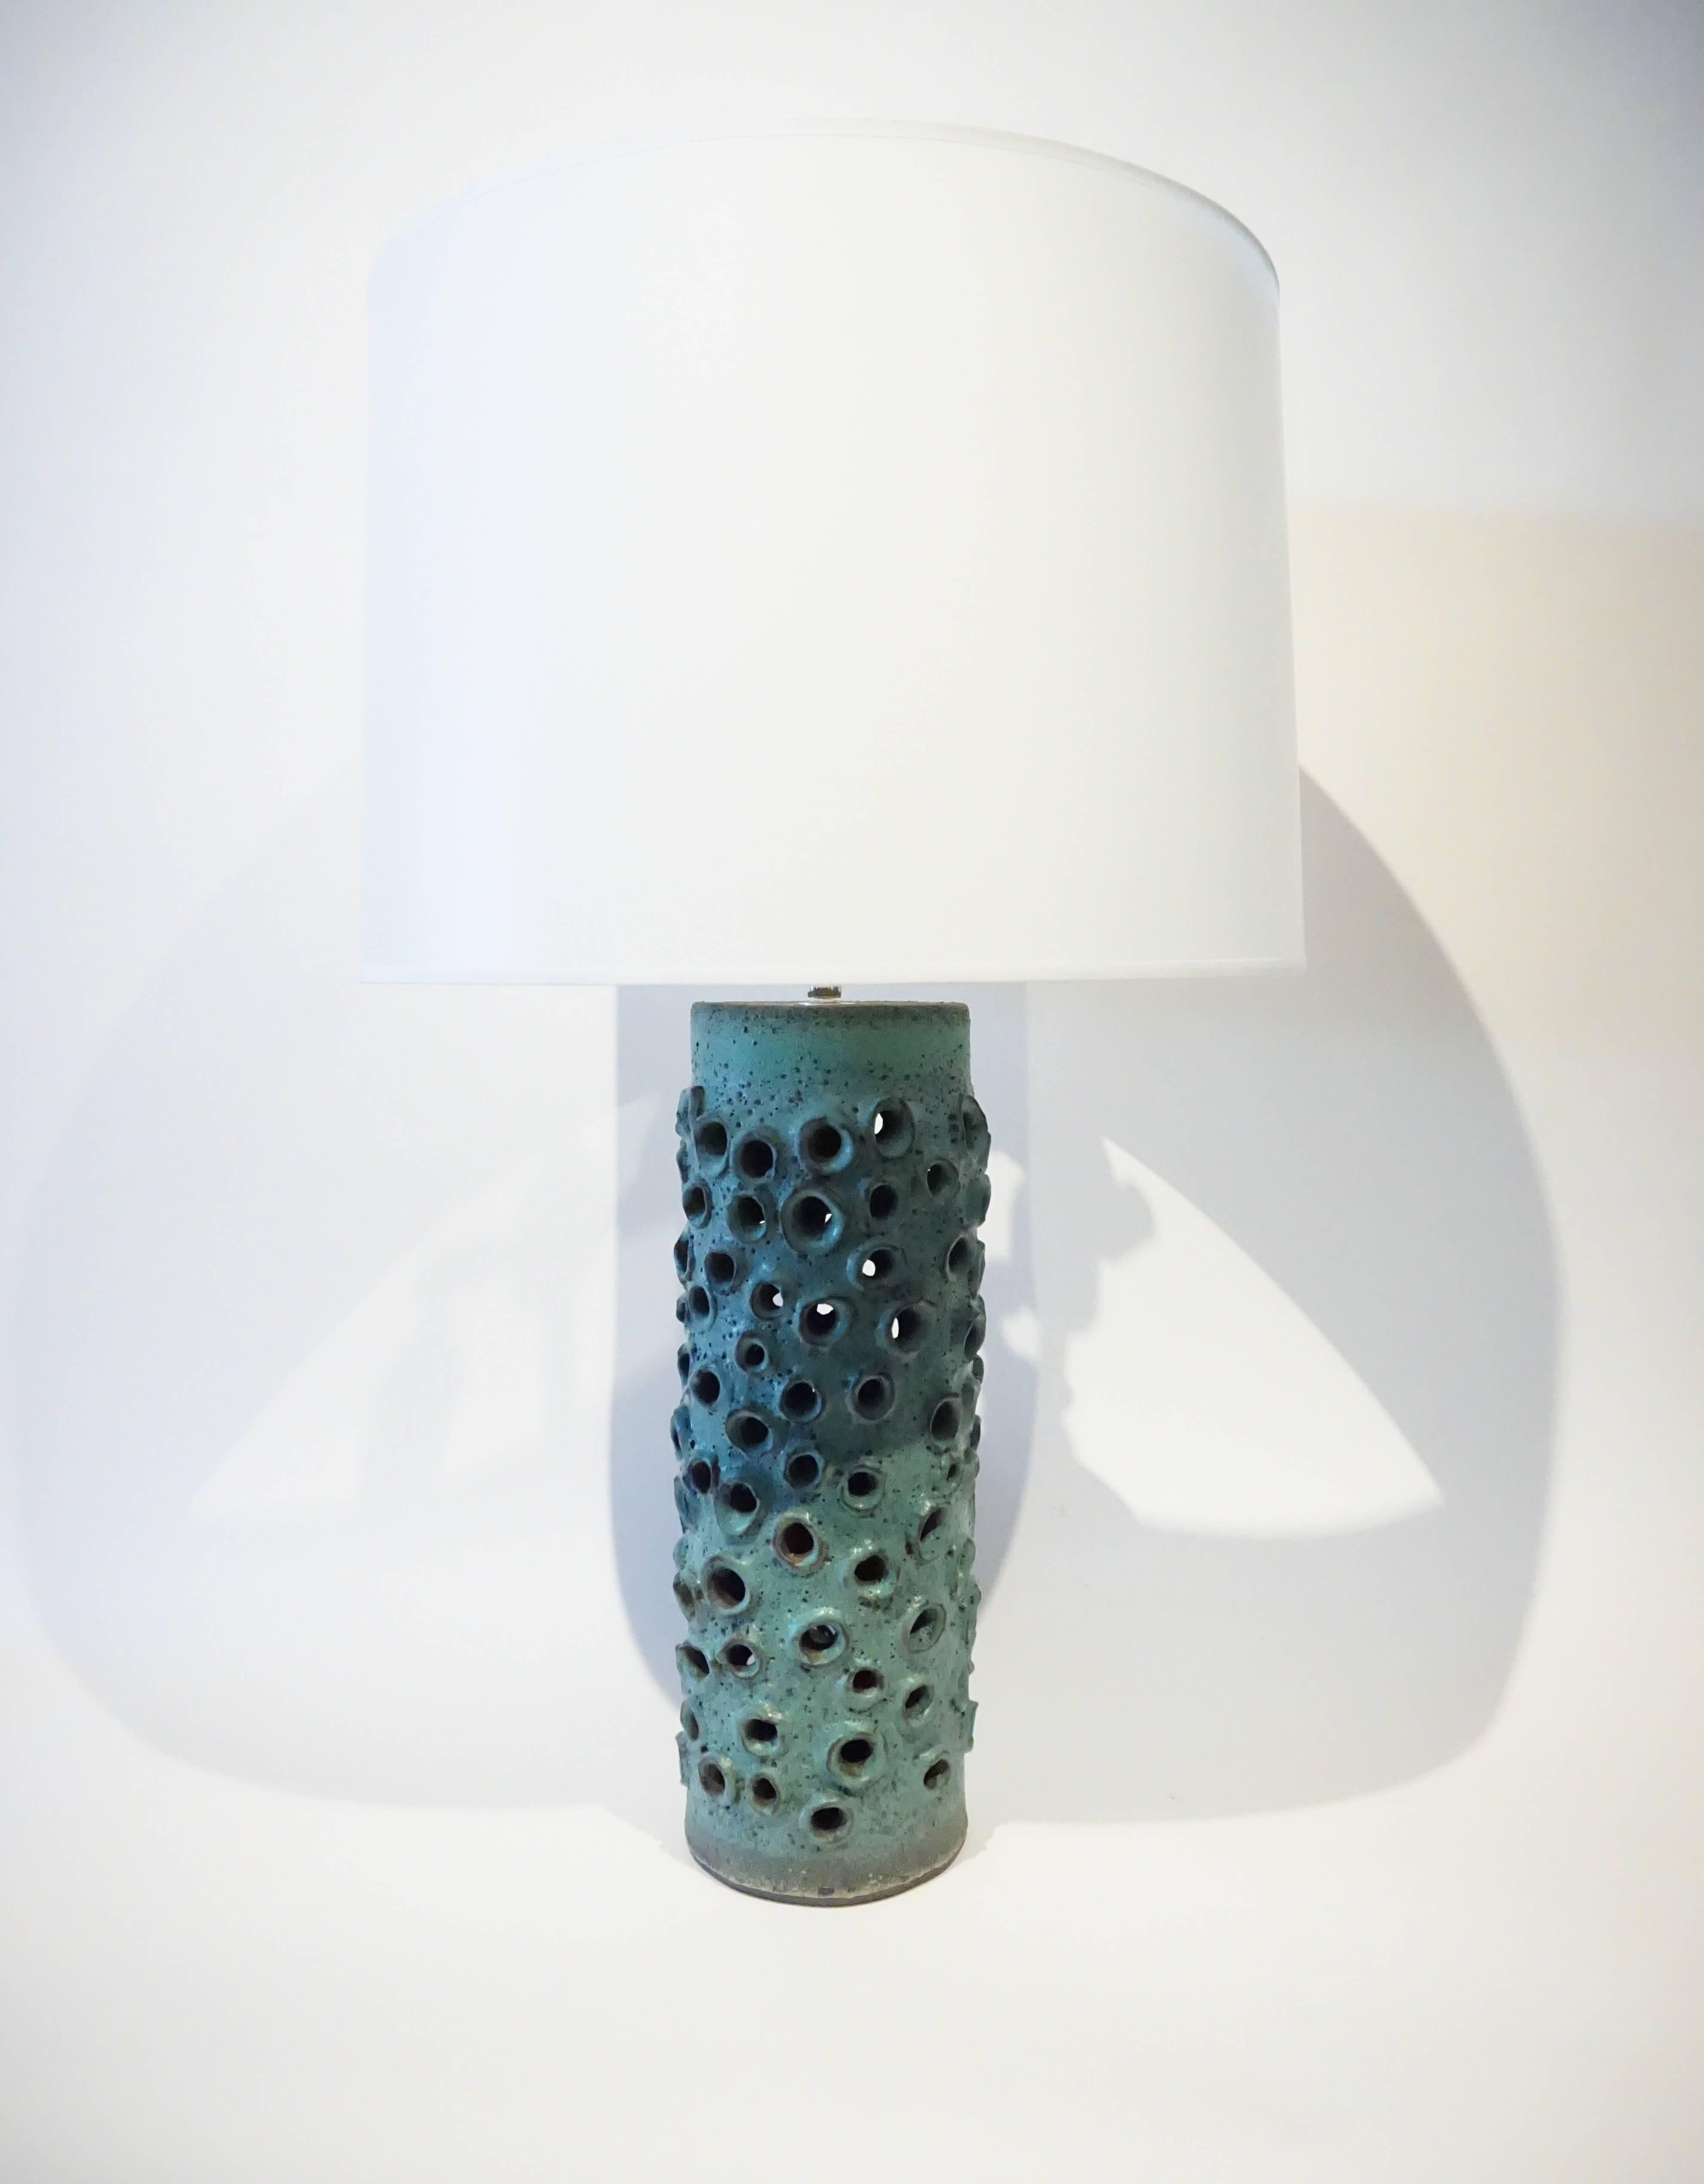 A hand-made turquoise-glazed pottery table lamp, made for Christopher Anthony Ltd. by American studio ceramicist Warner Walcott. C. 2016. Randomly spaced openings populate the body of the lamp and the thickly glazed surface references works produced